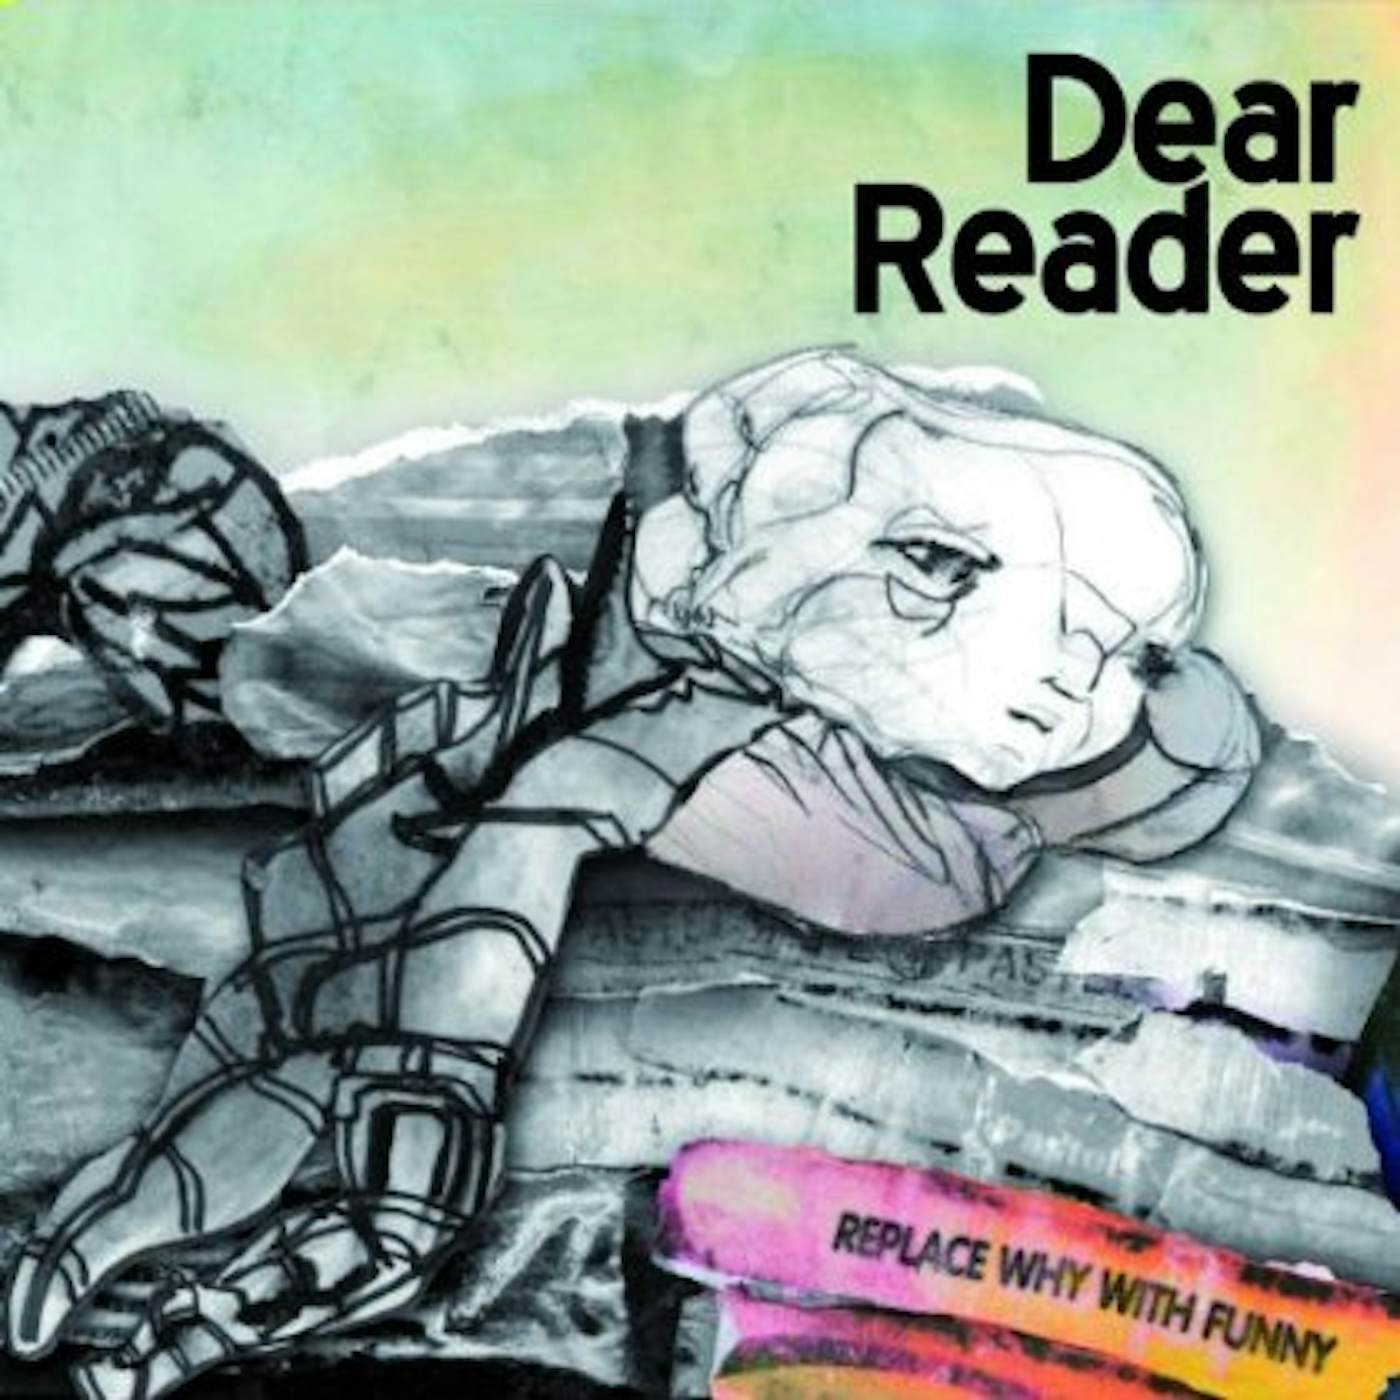 Dear Reader REPLACE WHY WITH FUNNY CD